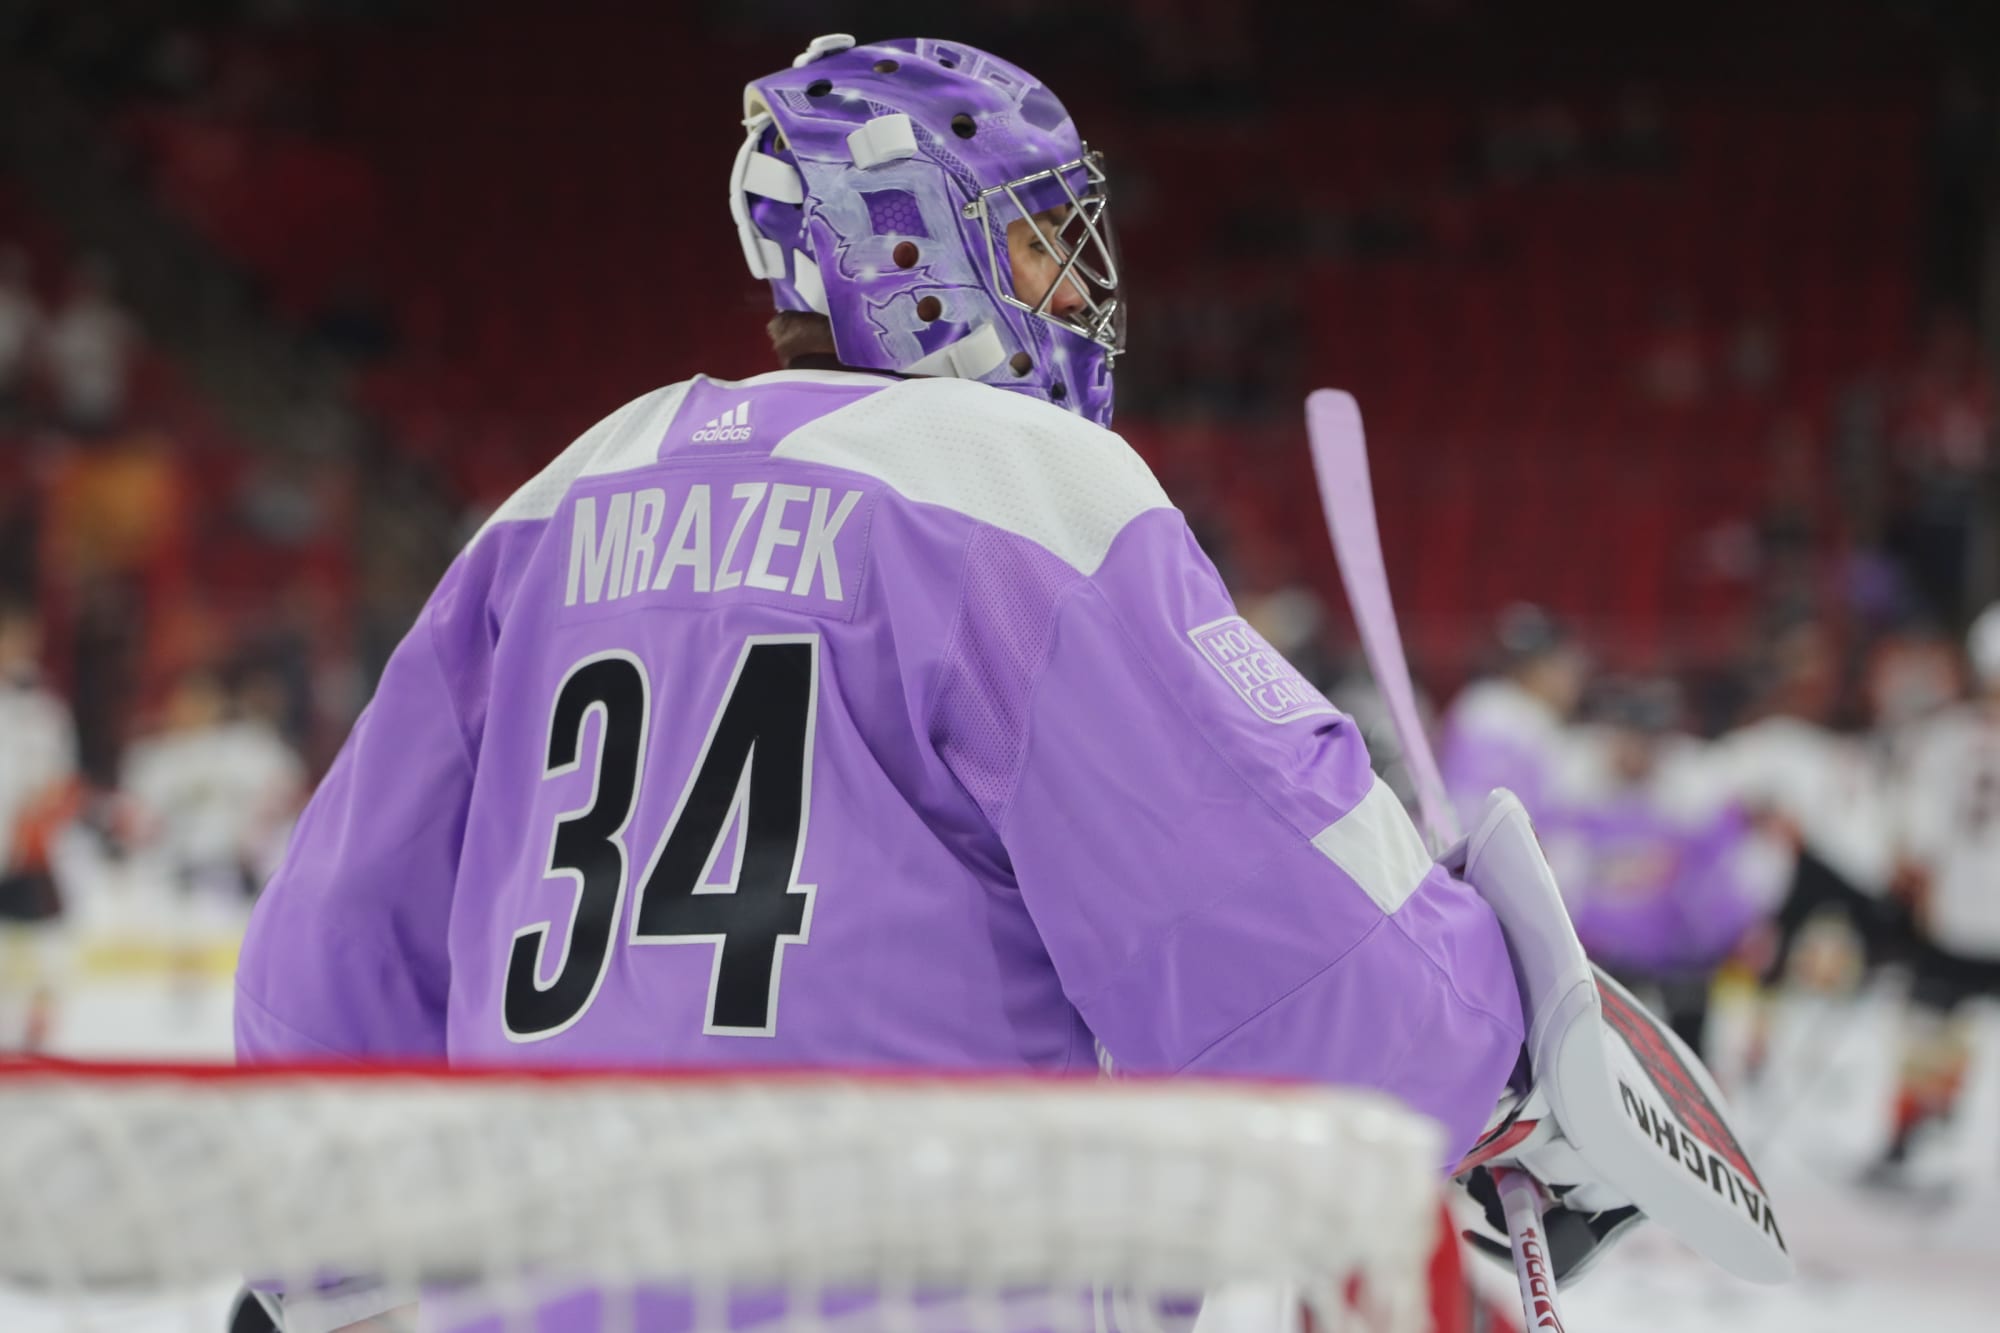 Carolina Hurricanes to Host Hockey Fights Cancer Night This Weekend